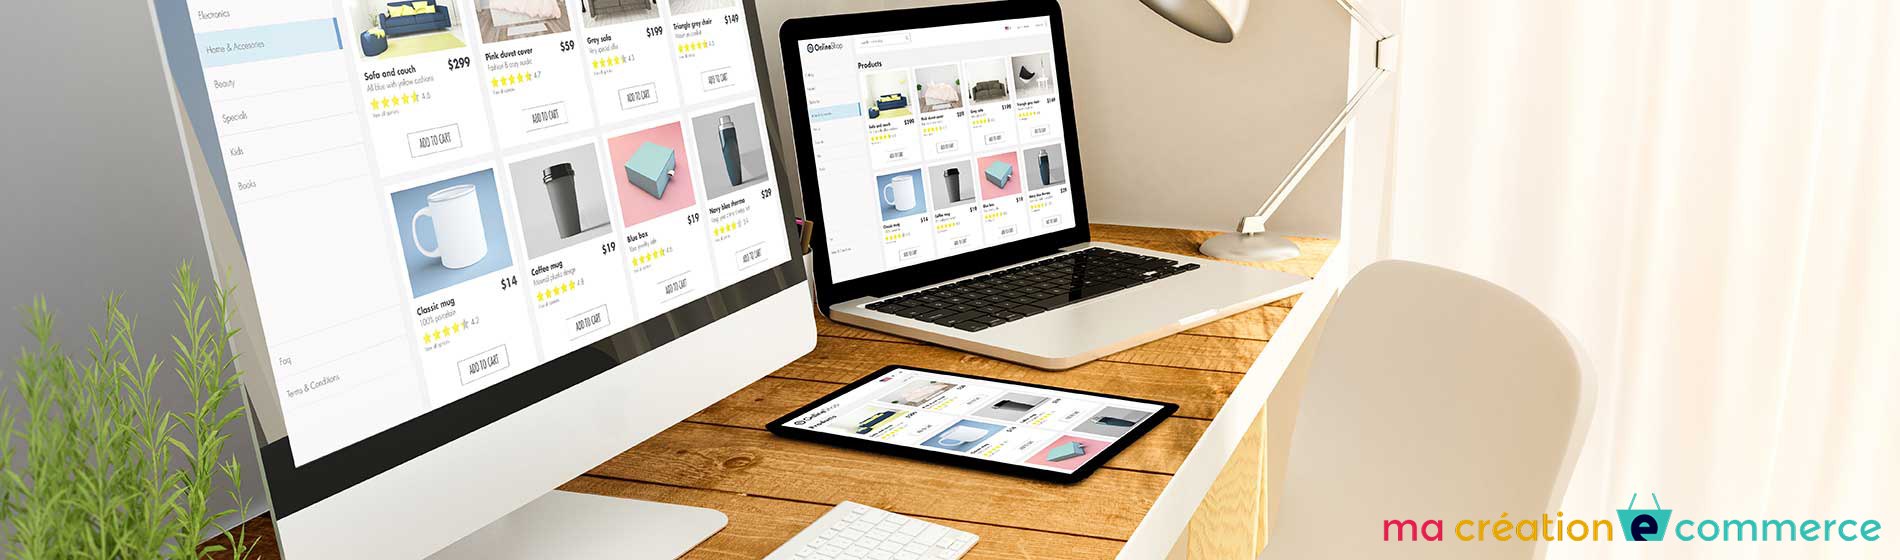 Creation Site E Commerce 80 Somme